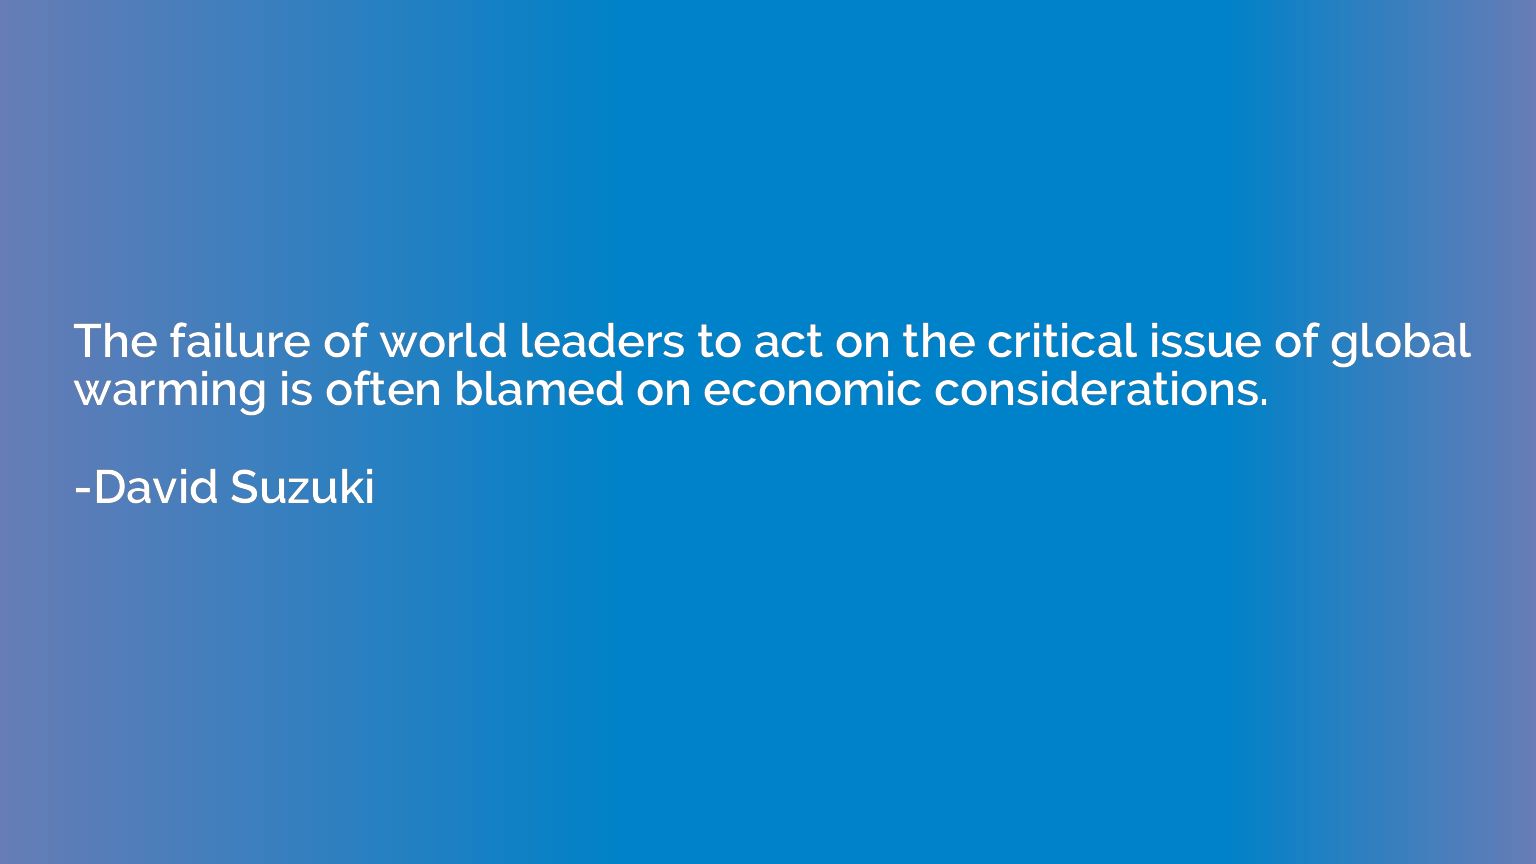 The failure of world leaders to act on the critical issue of